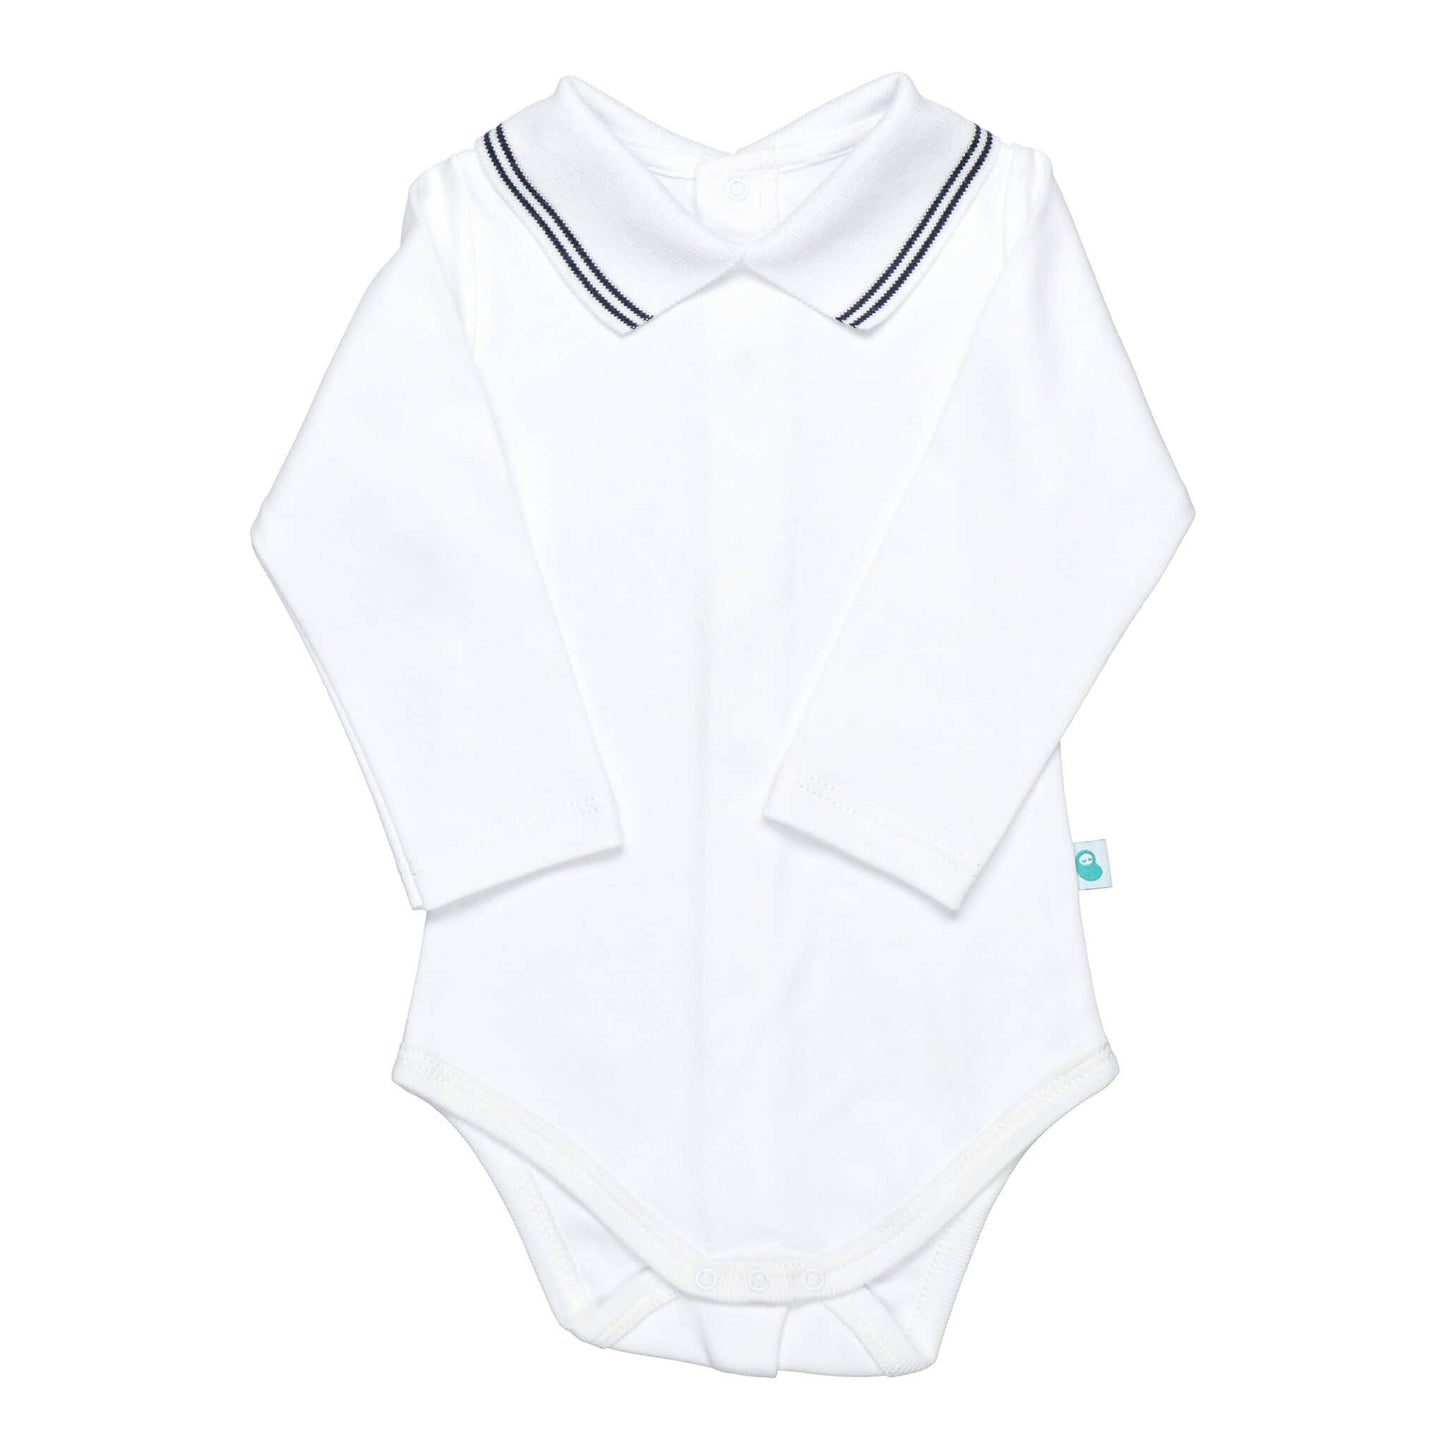 Cotton Baby Bodysuit Onesie with Polo-Style Collar: 1-3M / Long Sleeve / Light Blue